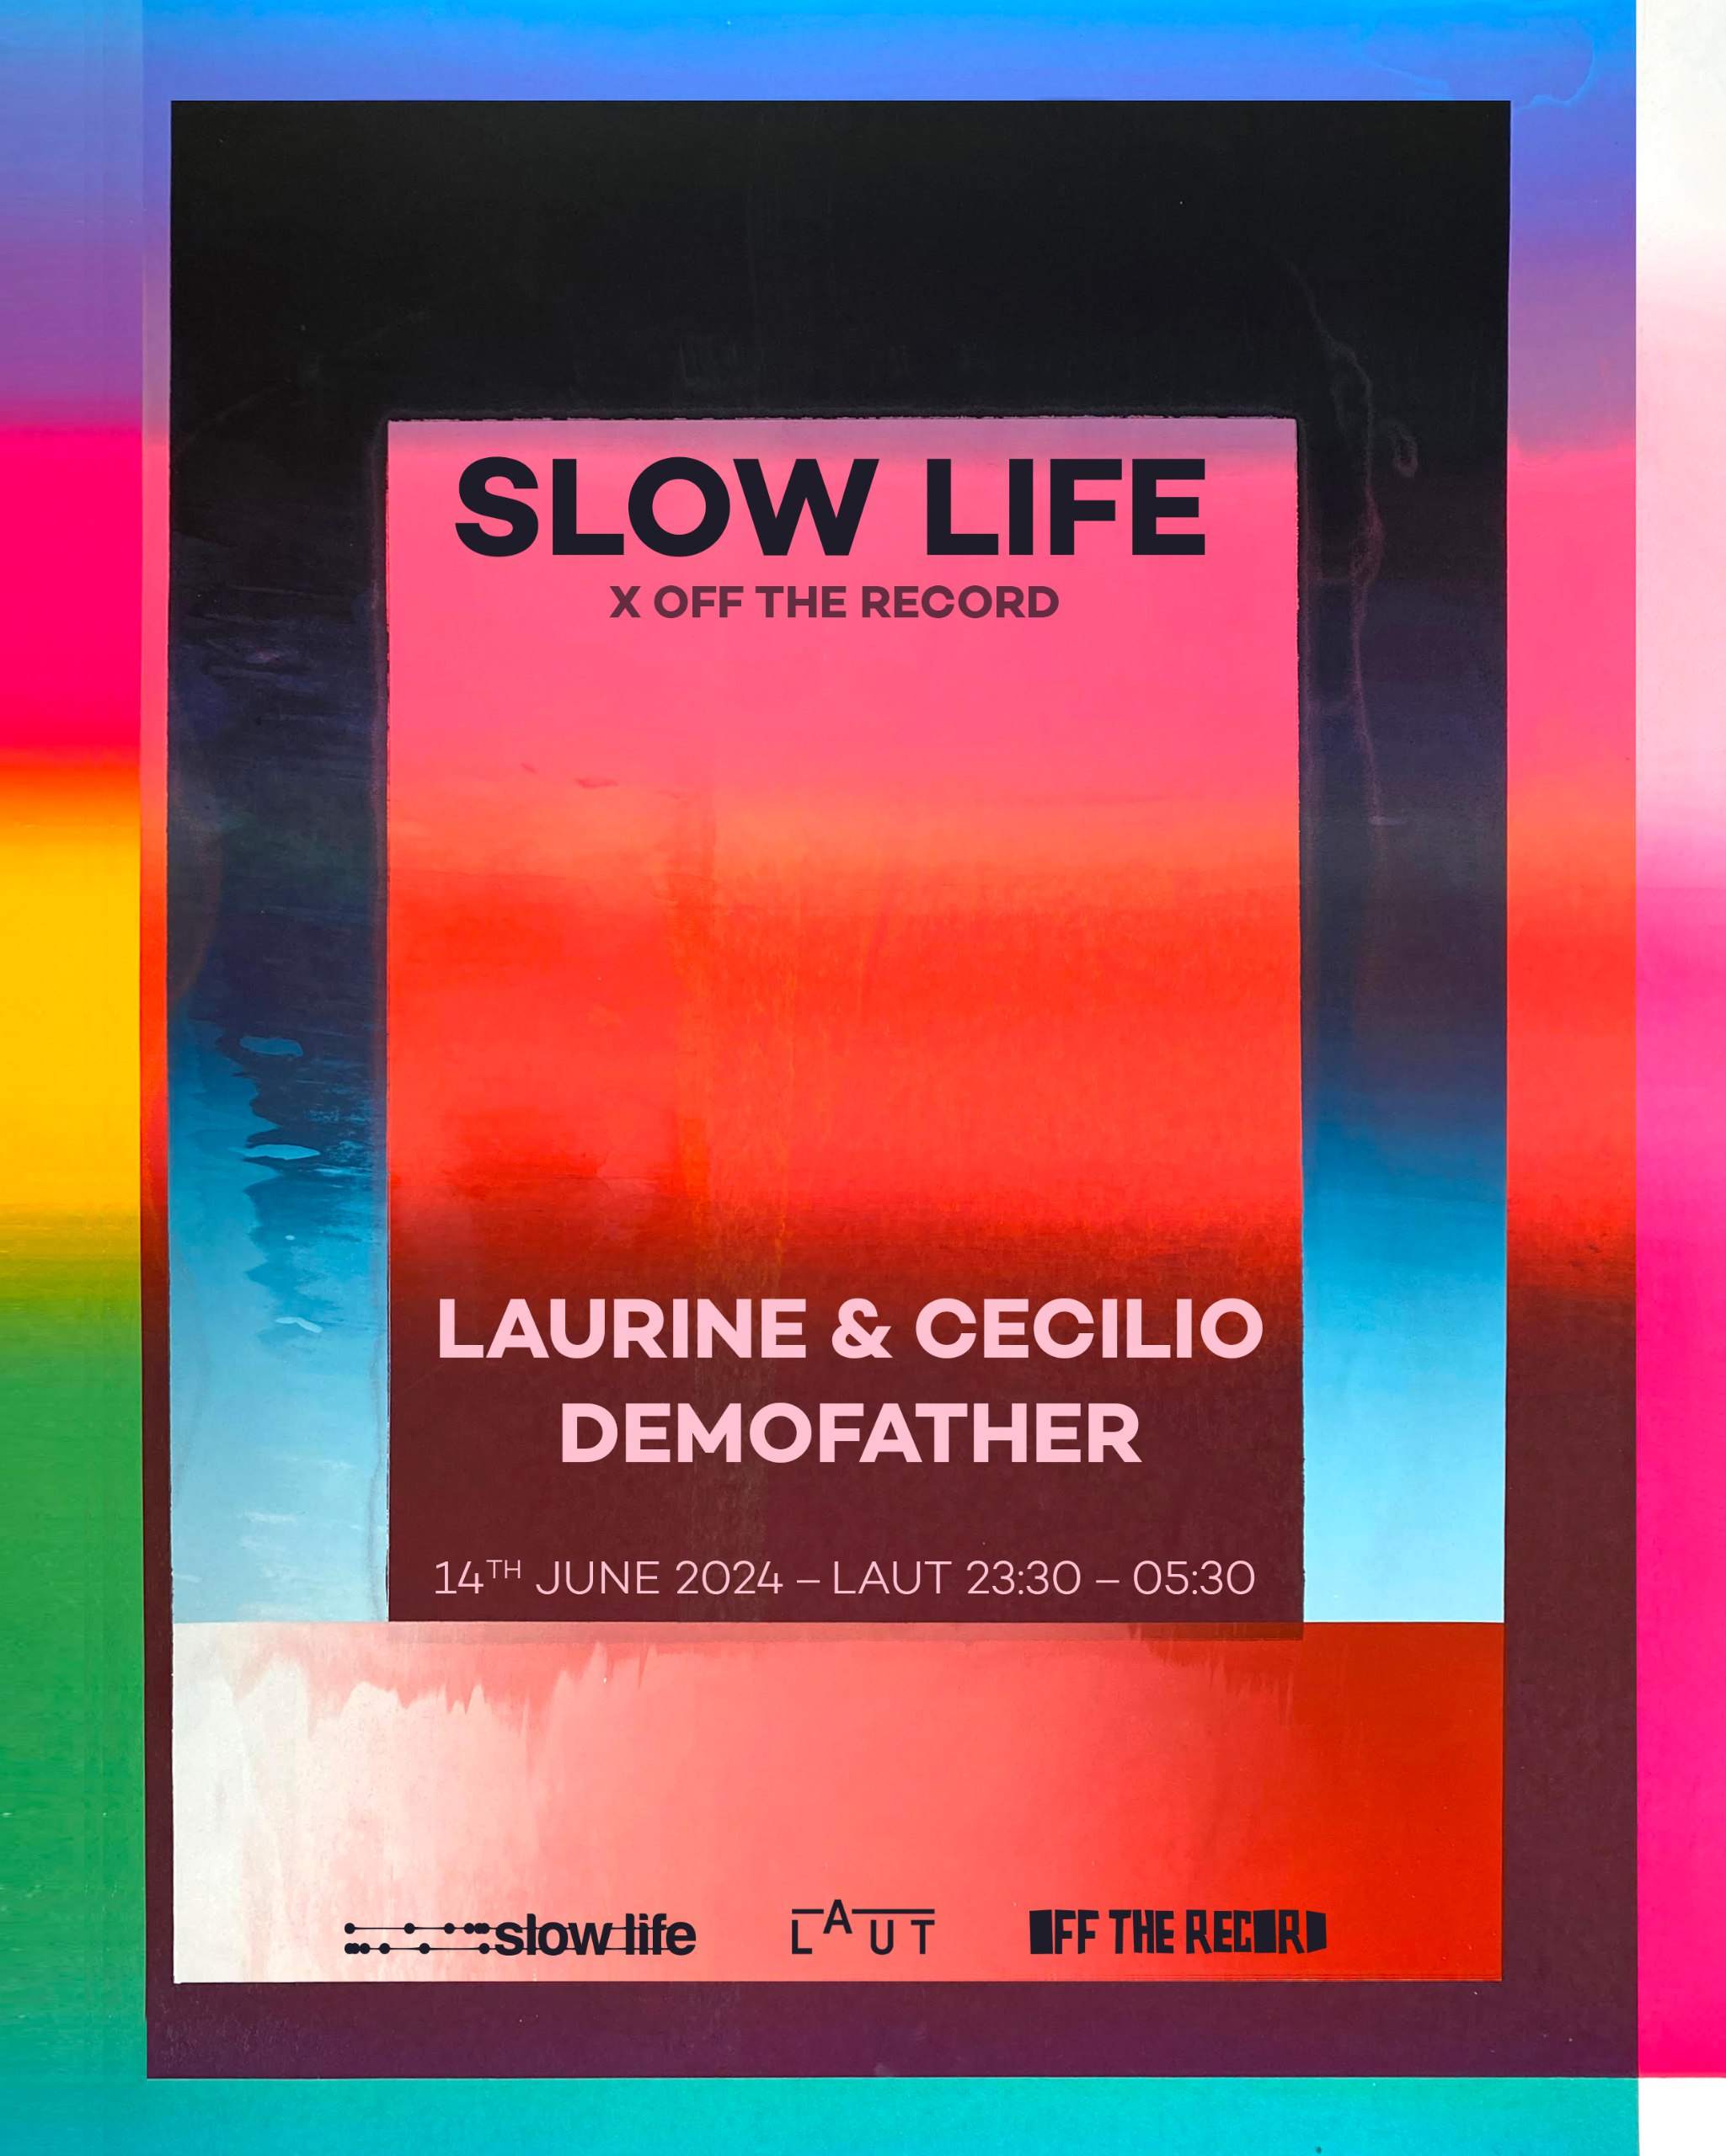 Slow Life X Off The Record - Página frontal